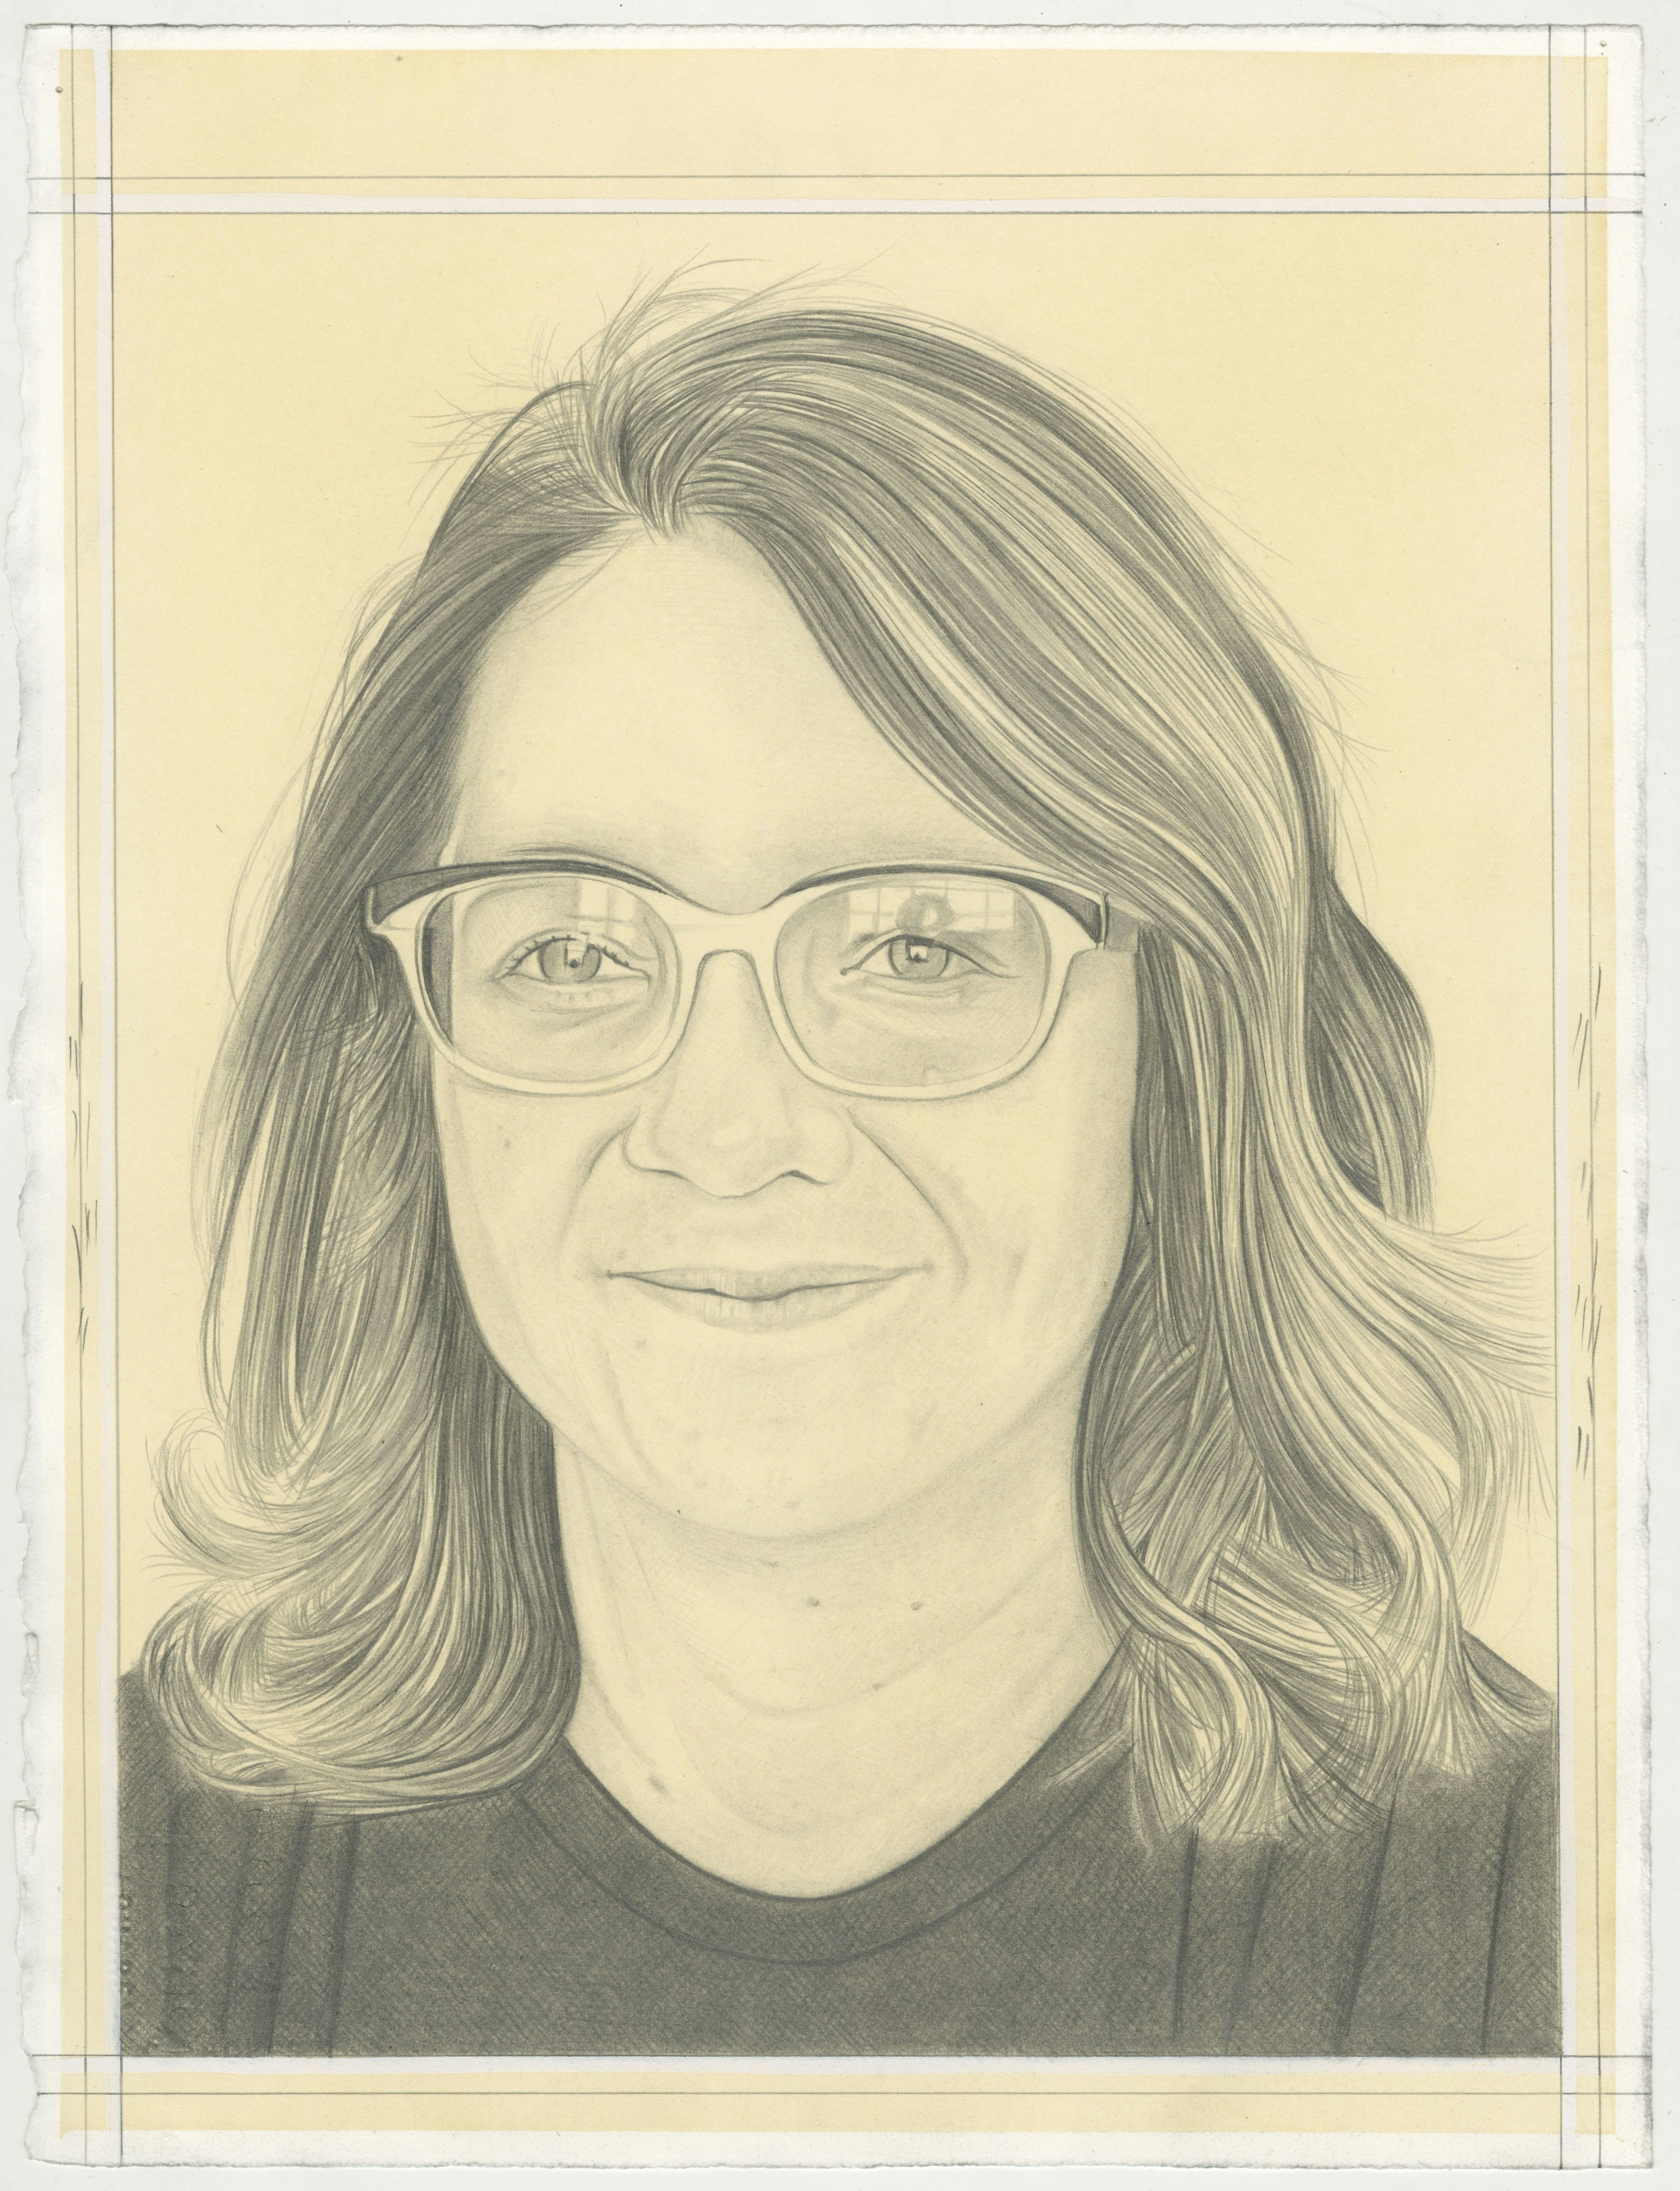 Portrait of Gina Beavers, pencil on paper by Phong H. Bui.